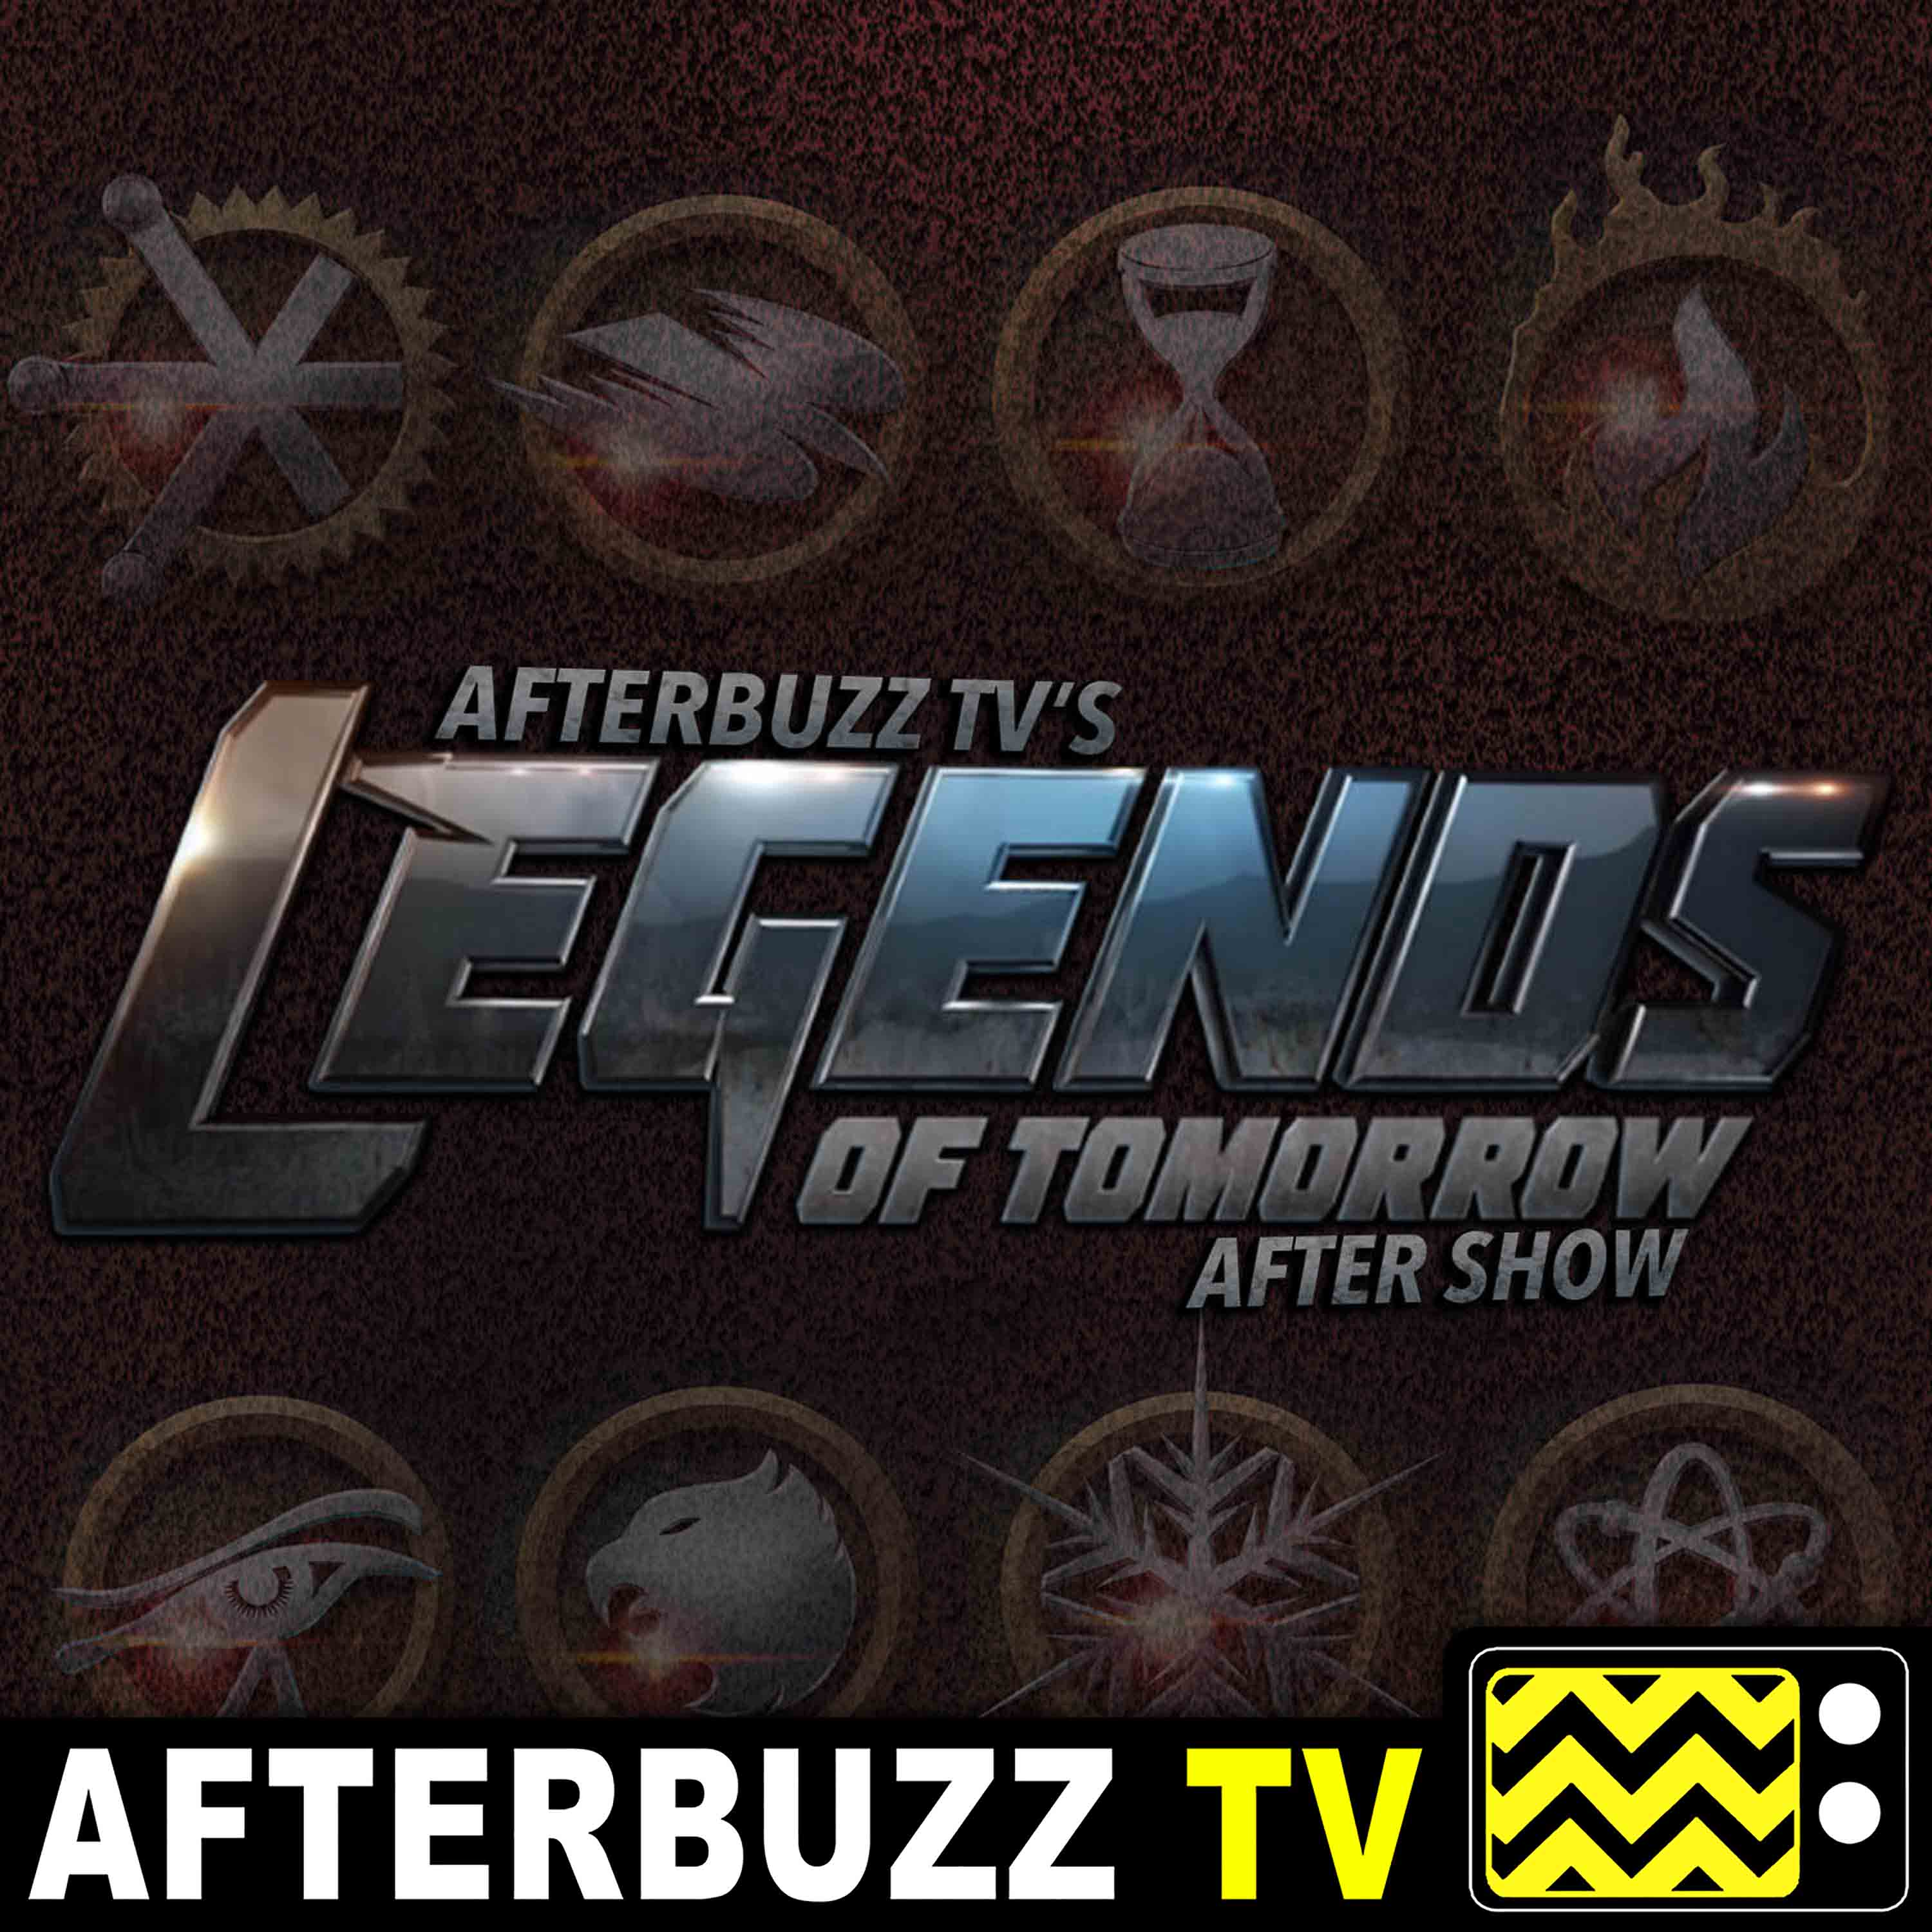 Legends Of Tomorrow S:3 | No Country For Old Dads E:13 | AfterBuzz TV AfterShow